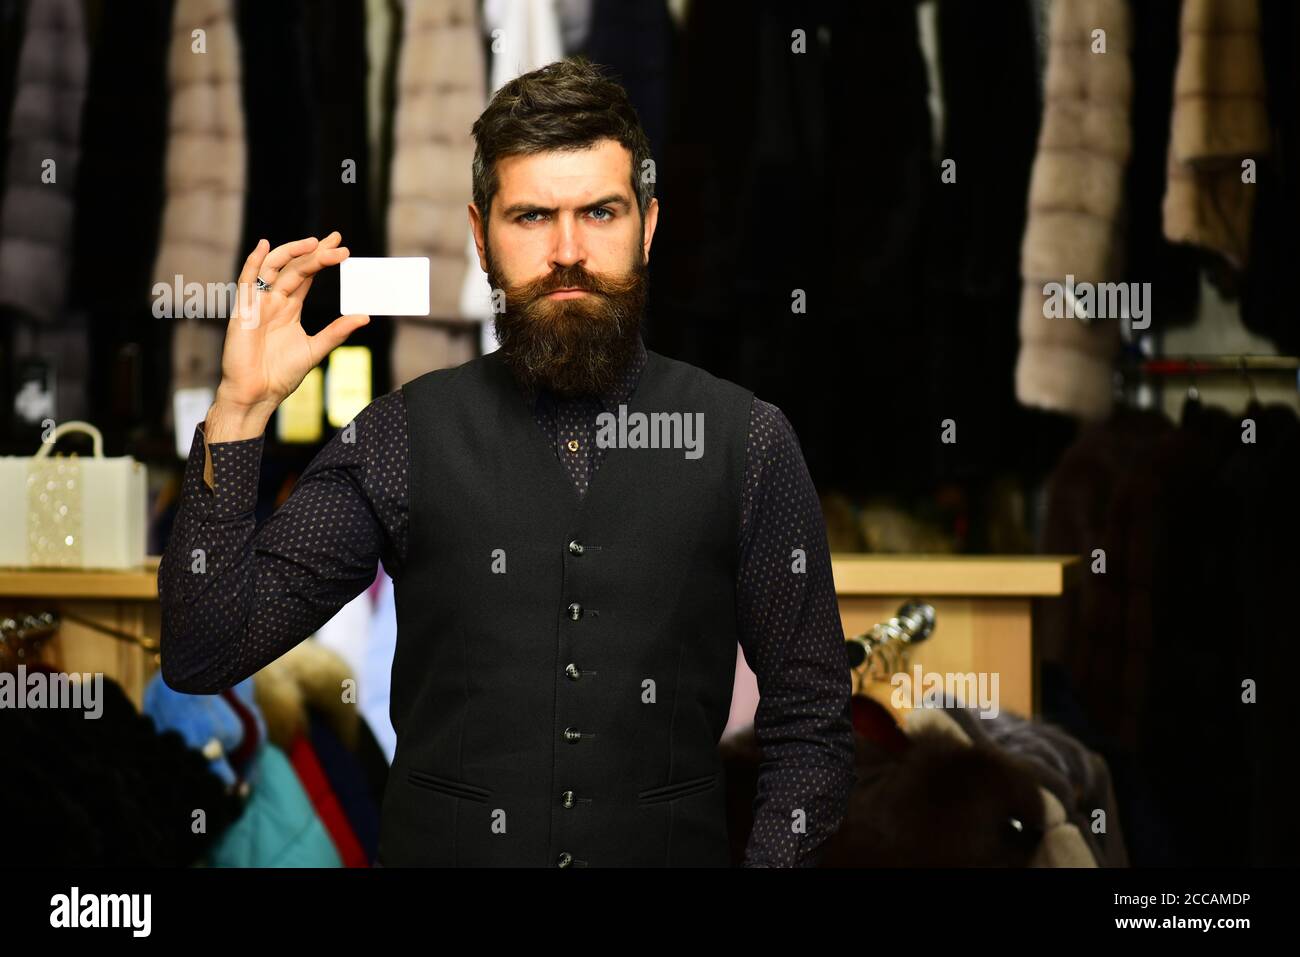 Customer with beard and business card. Shop assistant with empty paper.  Finance and shopping concept. Man with strict face holds card on furry  coats racks background, defocused Stock Photo - Alamy